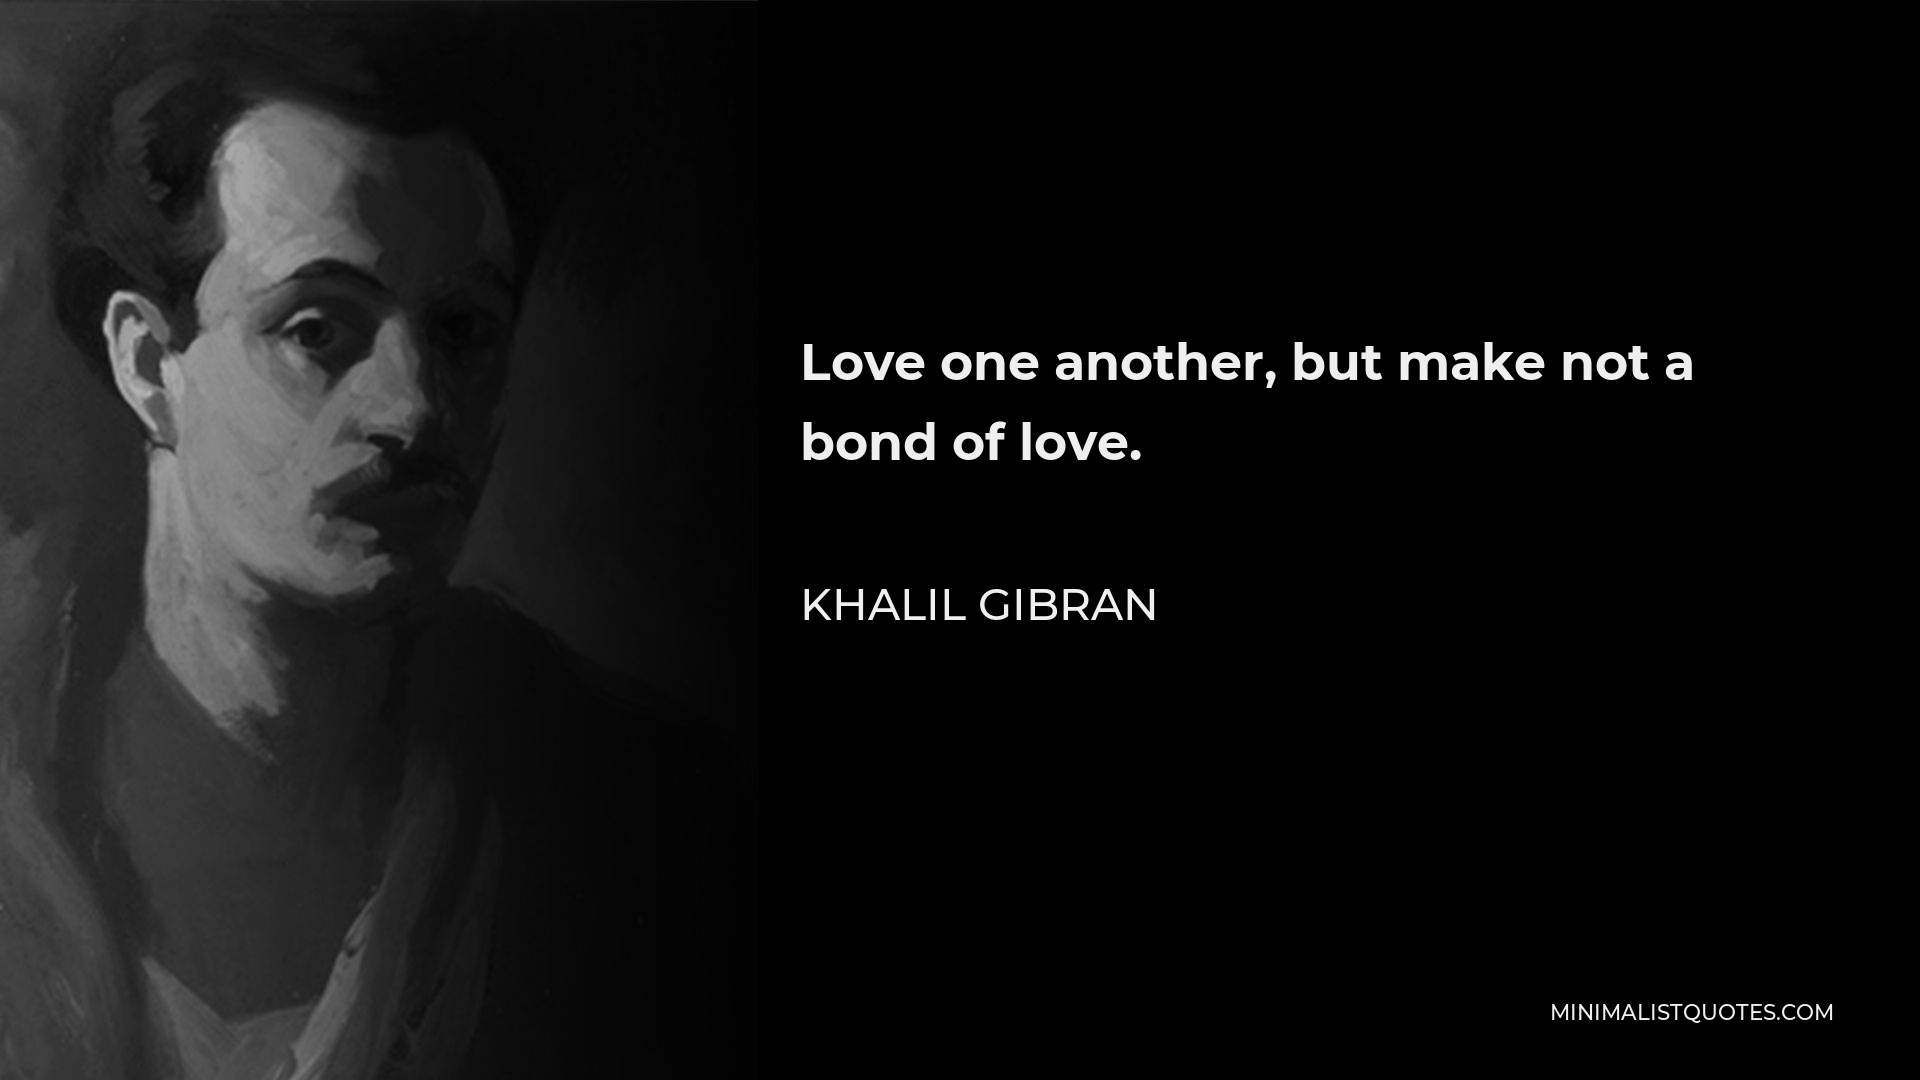 Khalil Gibran Quote - Love one another, but make not a bond of love.